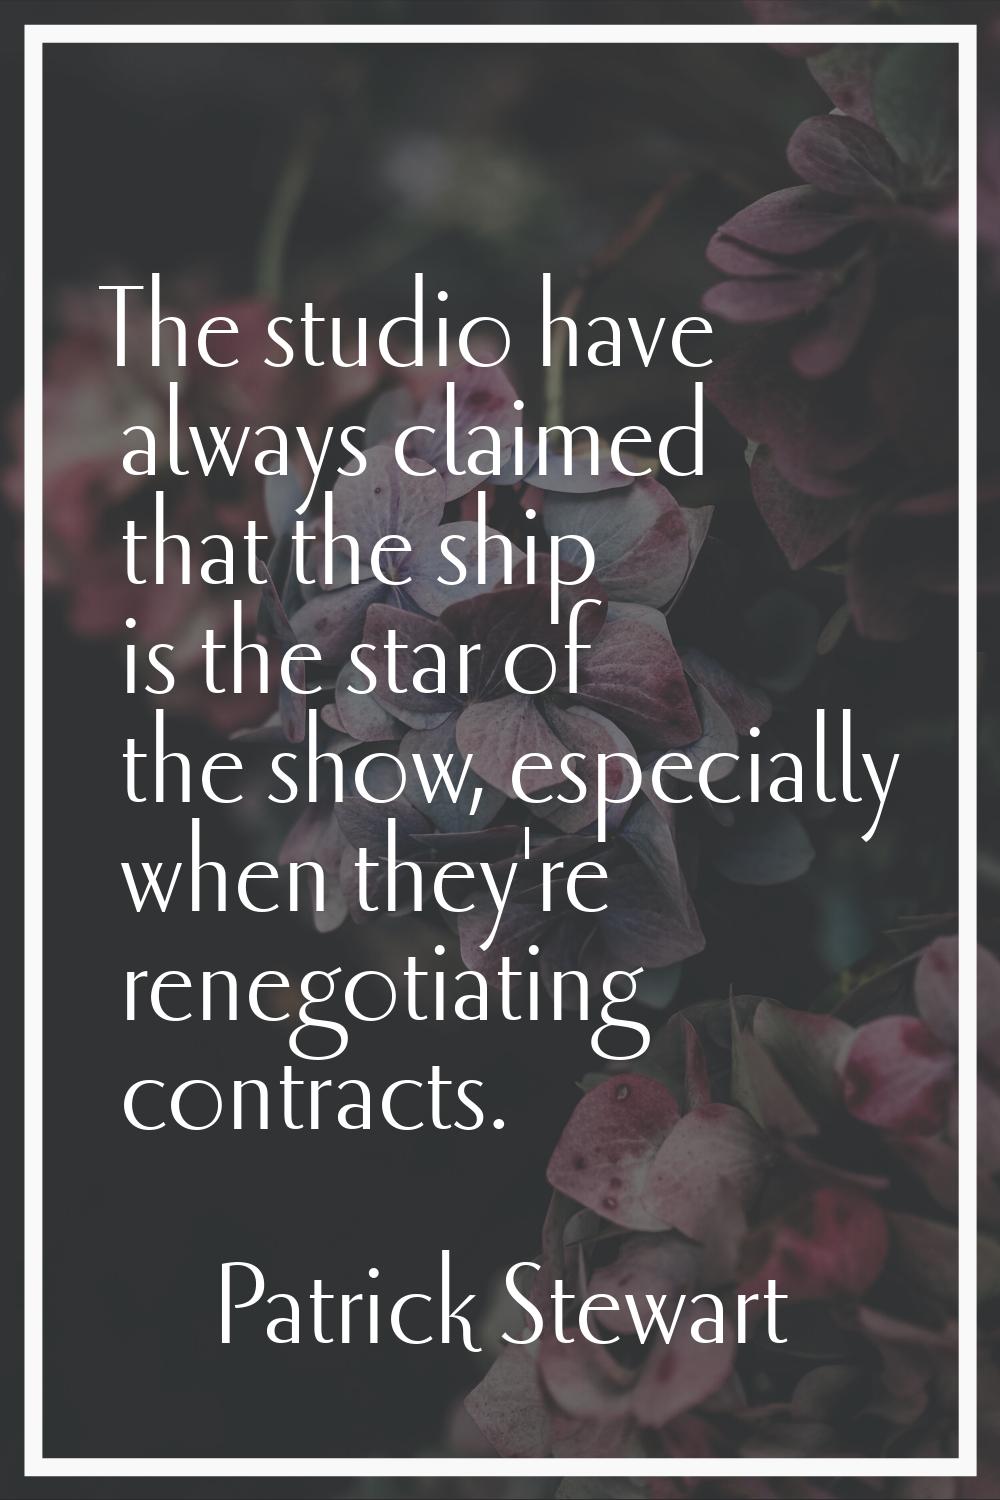 The studio have always claimed that the ship is the star of the show, especially when they're reneg